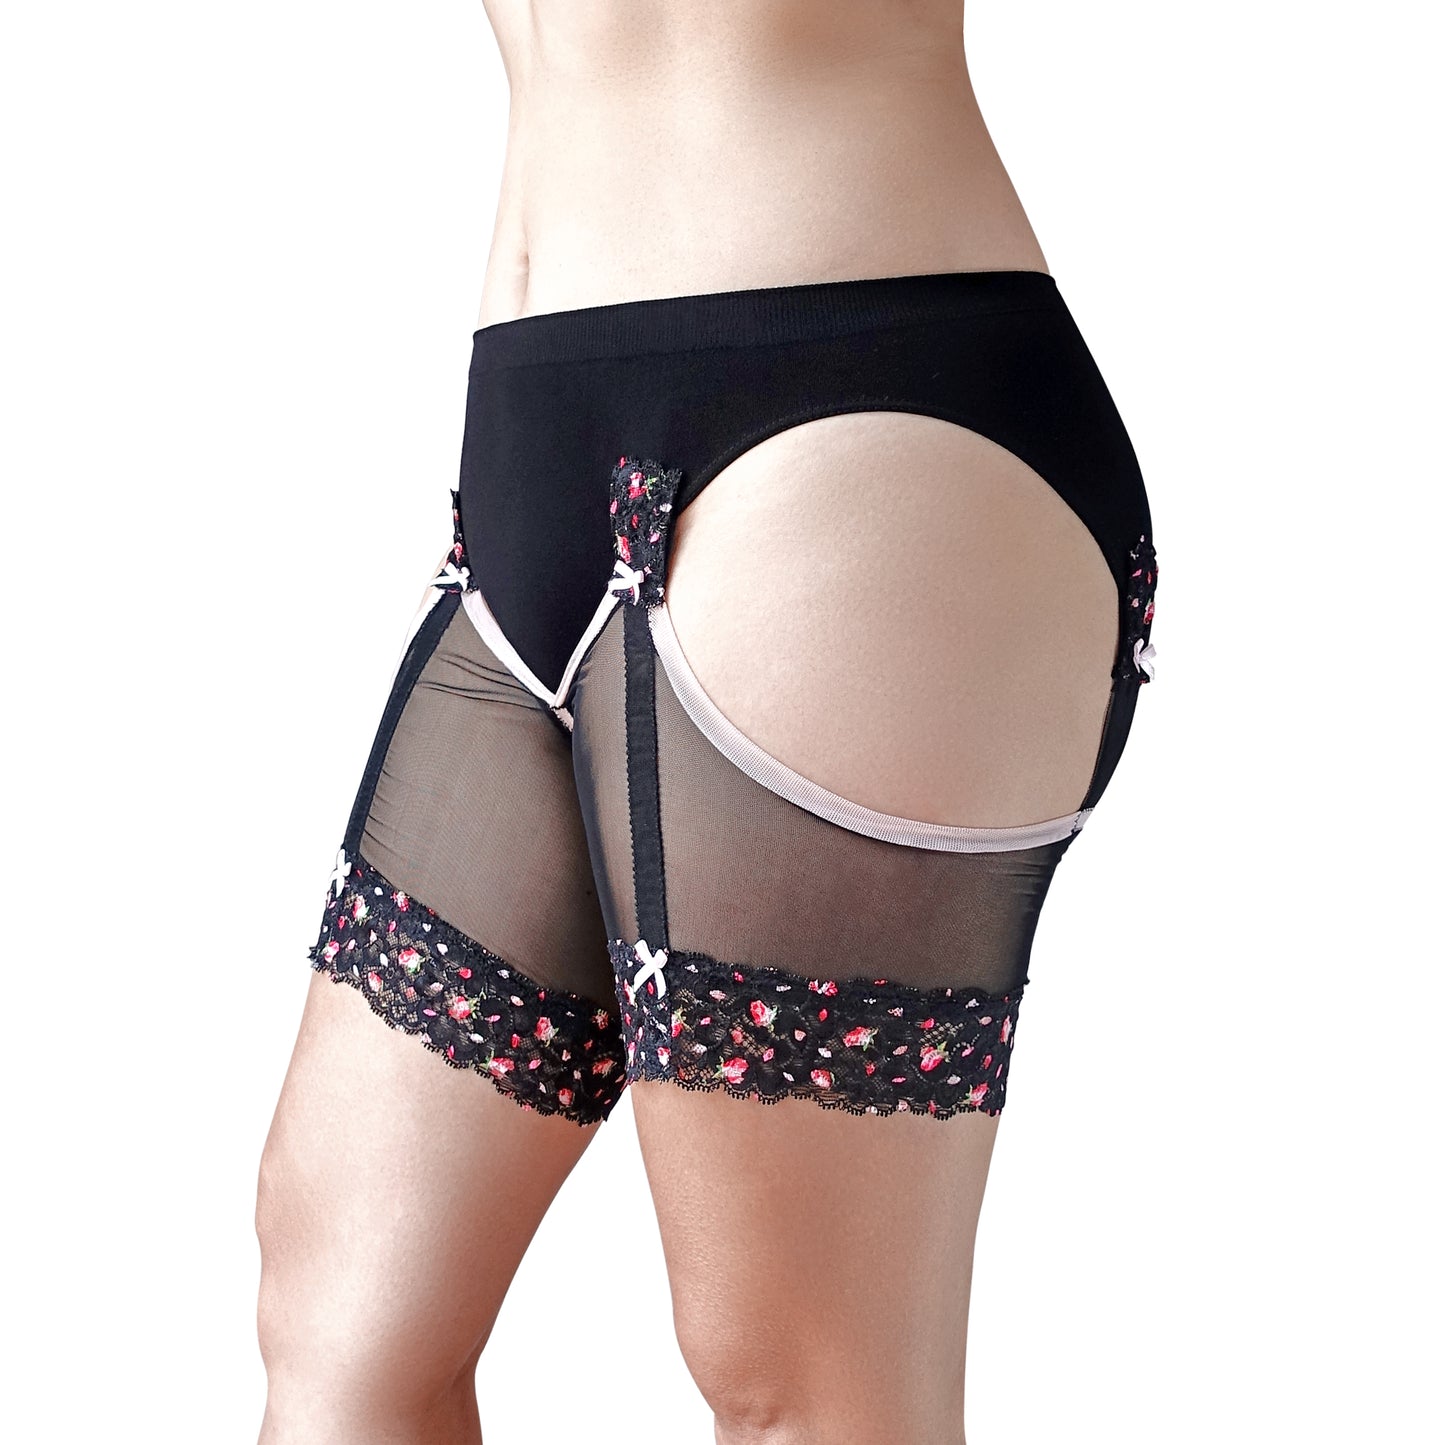 ANTI CHAFE Clip-On Thigh Bands - ROSEBUDS